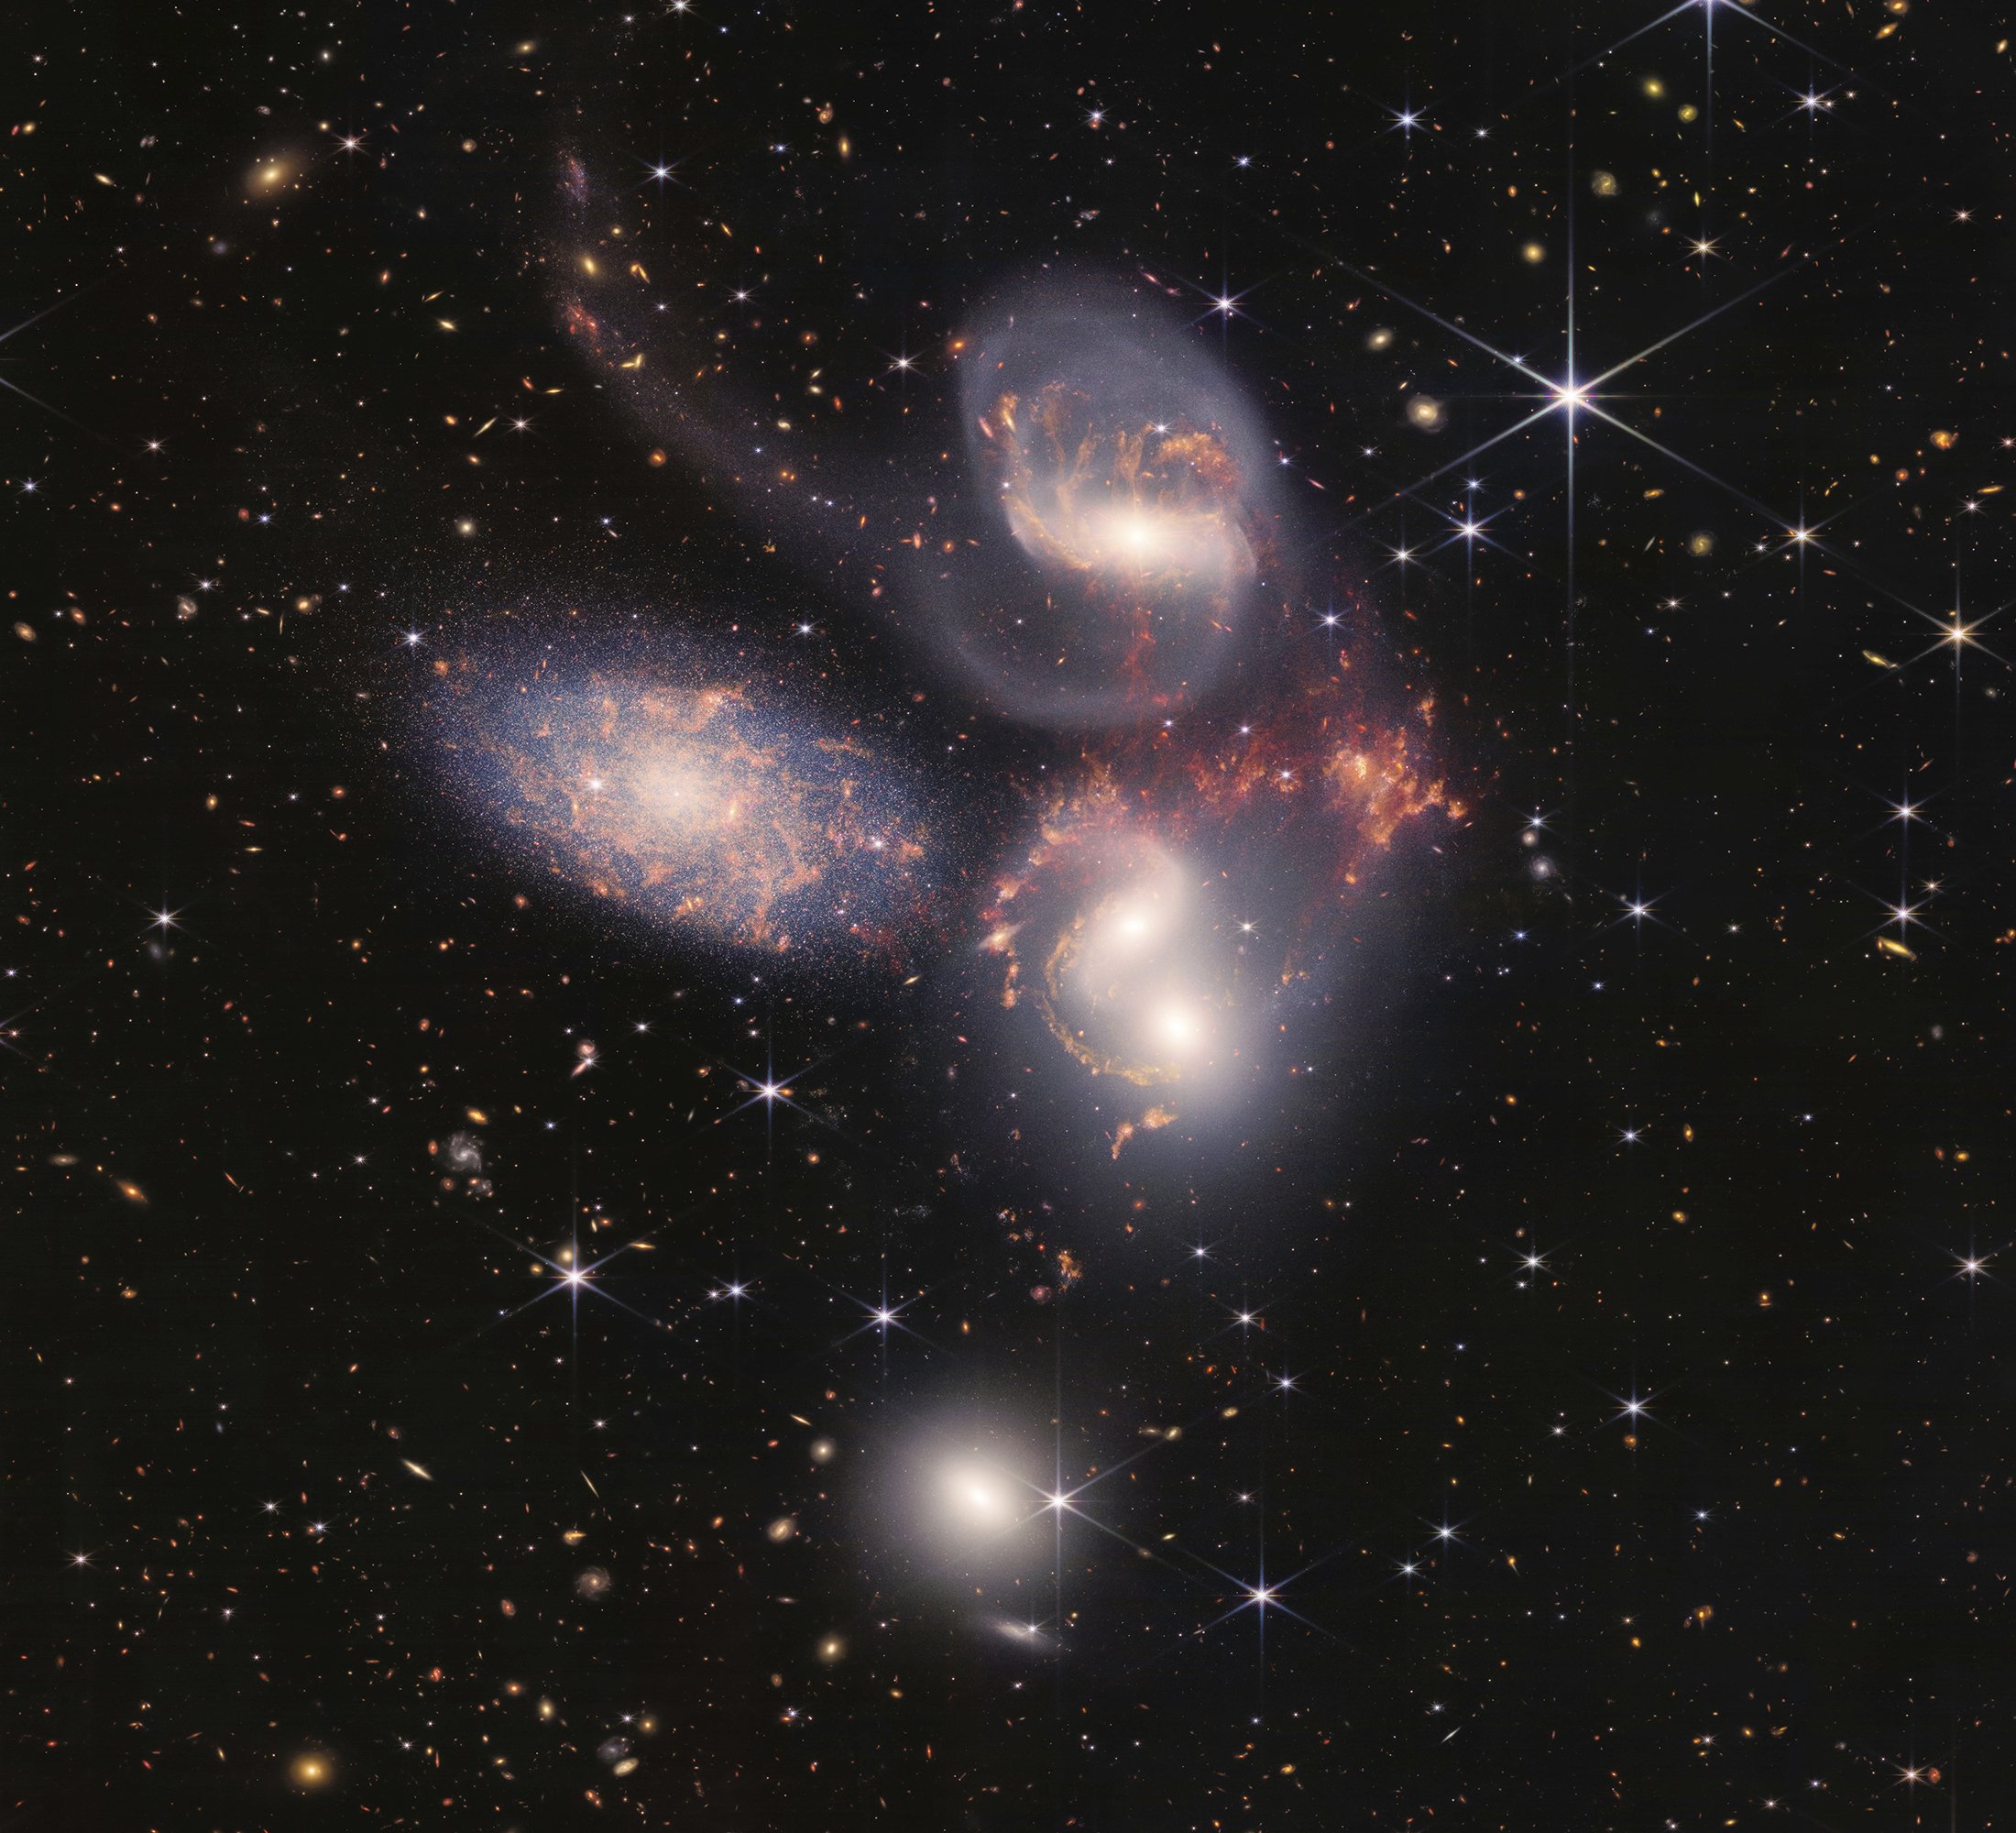 The Stephan's Quintet, a visual grouping of five galaxies captured by the Webb Telescope's Near-Infrared Camera (NIRCam) and Mid-Infrared Instrument (MIRI), July 12, 2022. (AP Photo)